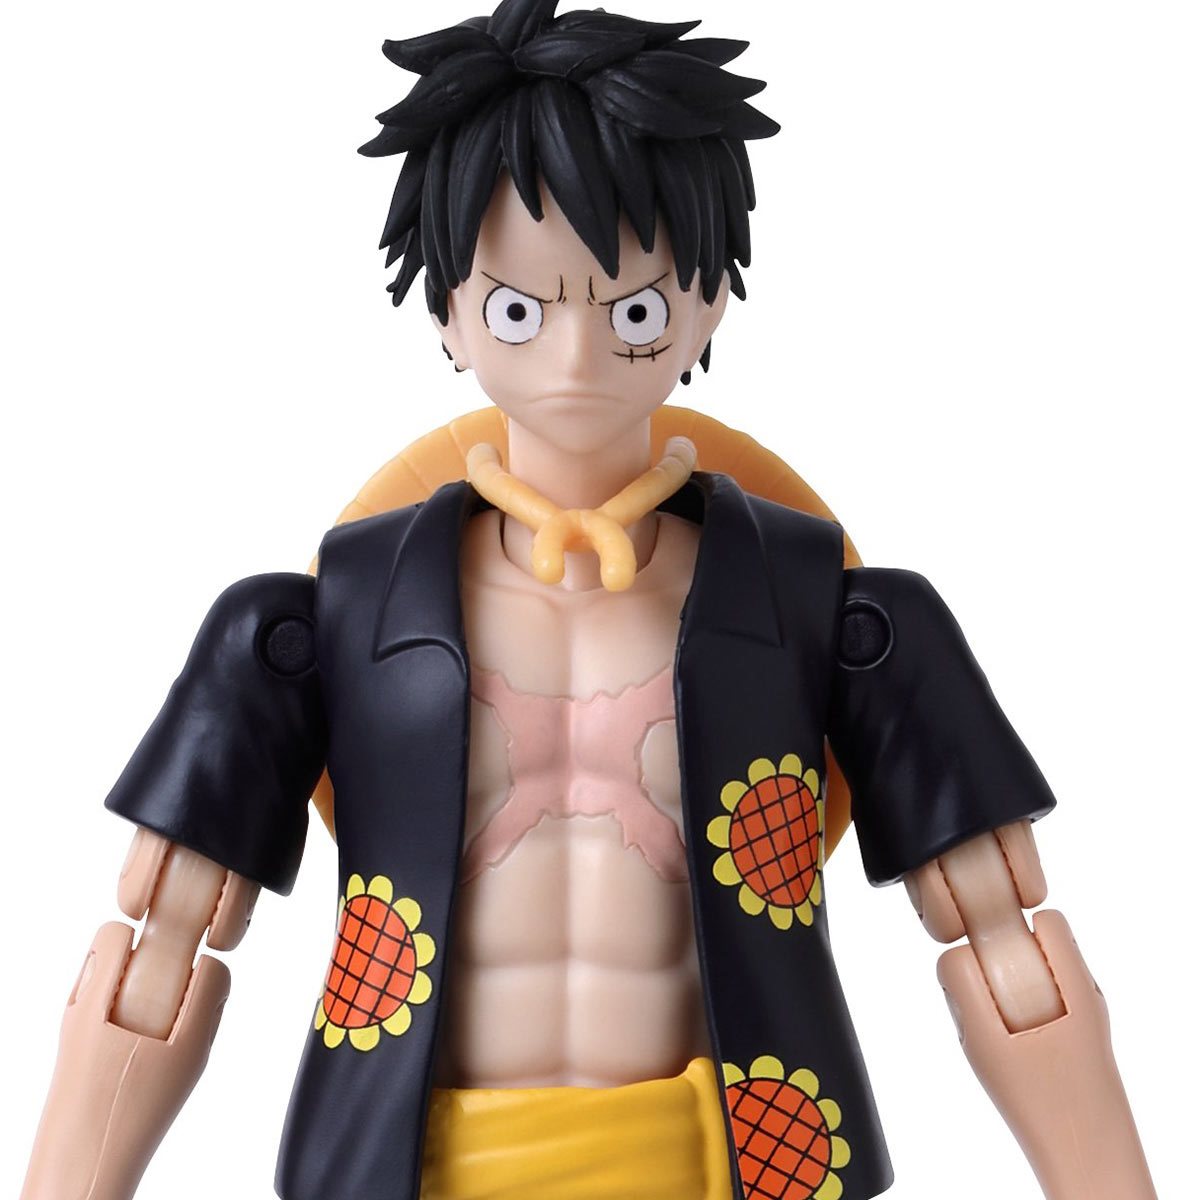 ANIME HEROES MONKEY D. LUFFY FIGURE REVIEW 